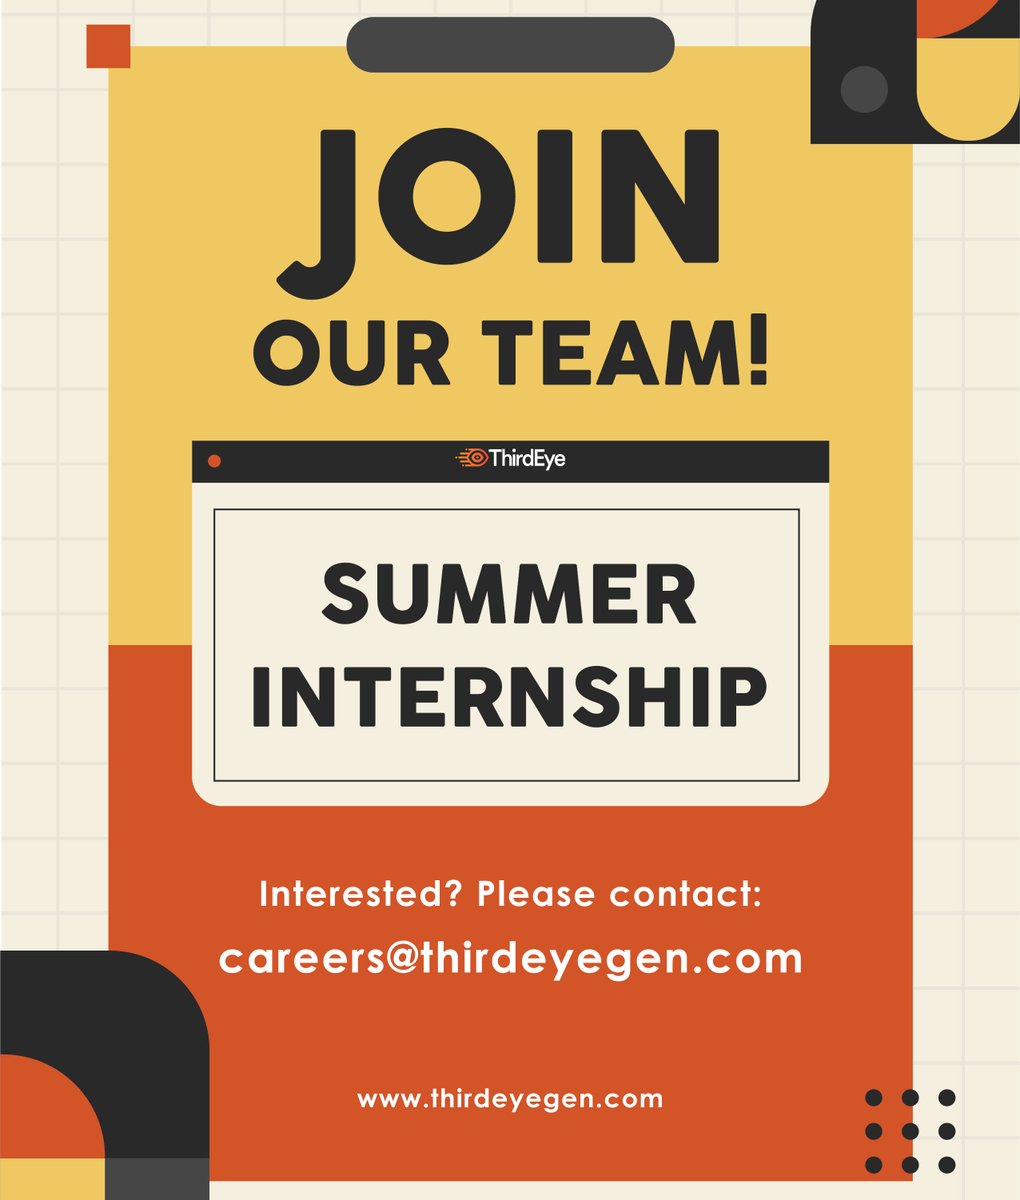 It's Summer Intern season! ThirdEye has many university partnerships and welcomes new people interested in AR/AI/Space! If interested, please contact: careers@thirdeyegen.com

Learn more about AR/AI at hubs.ly/Q01TTxVz0
#AugmentedReality #summerinternship #AI #smartglasses